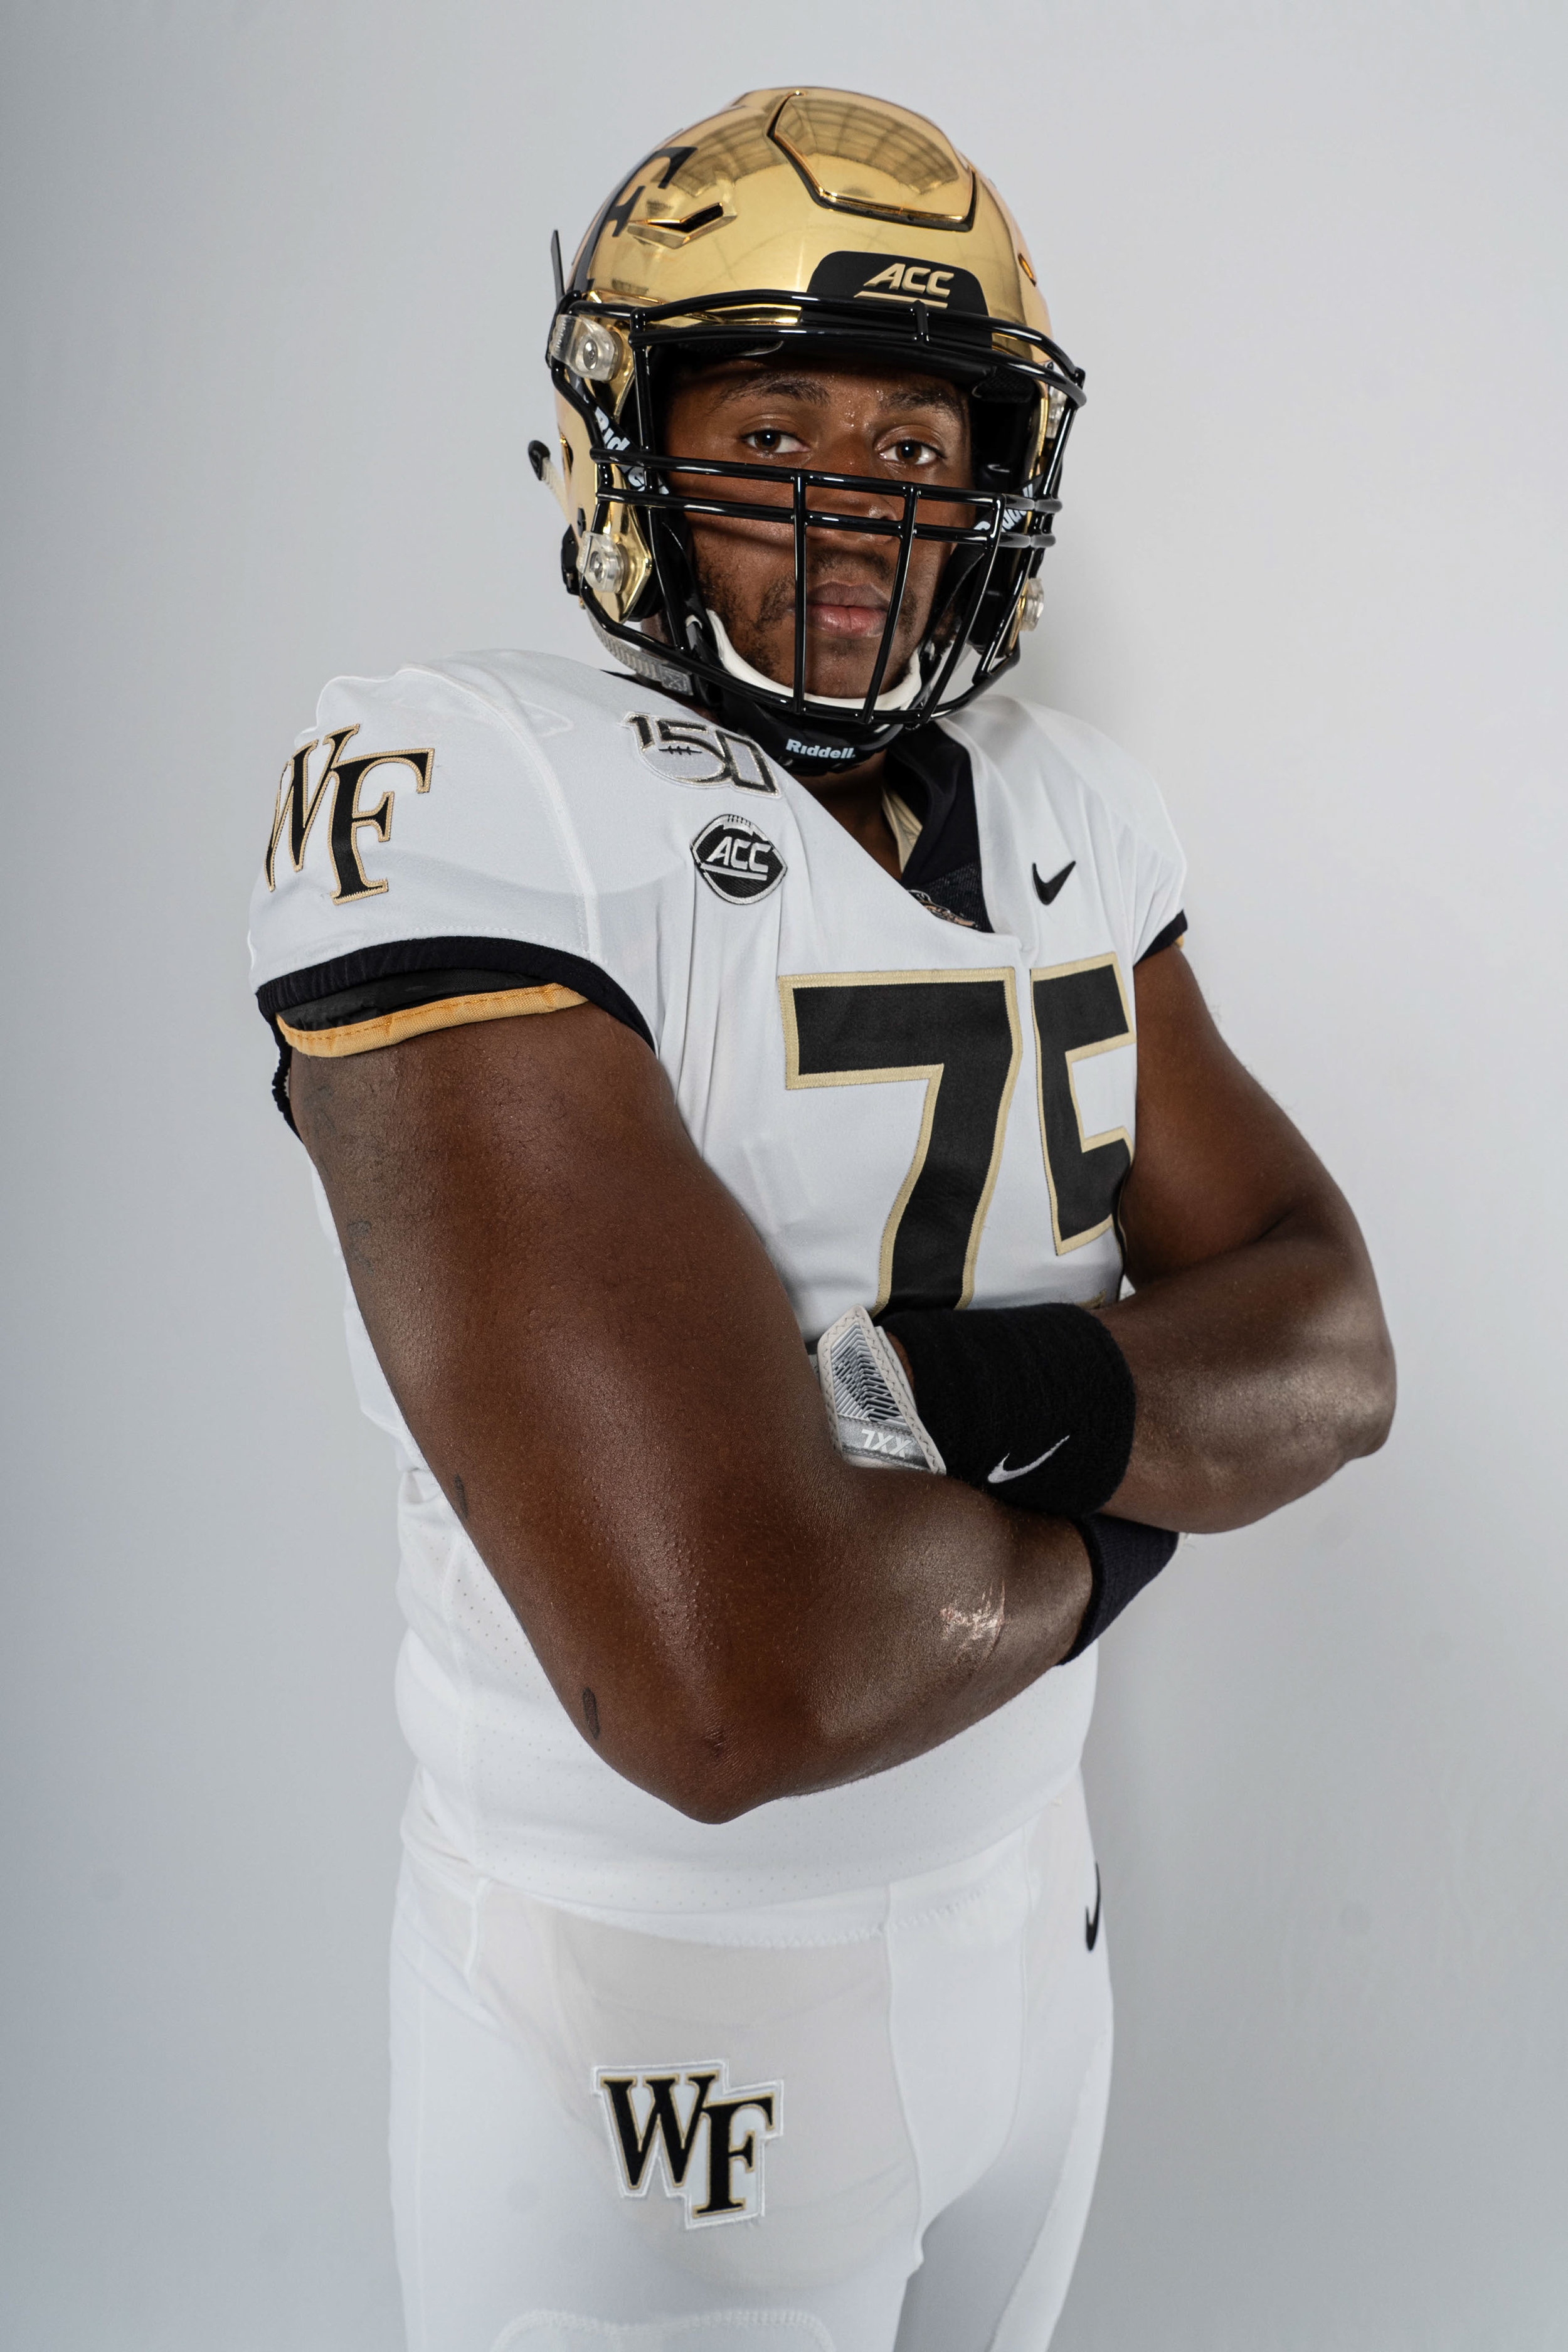 New Uniforms For Wake Forest Uniswag new uniforms for wake forest uniswag